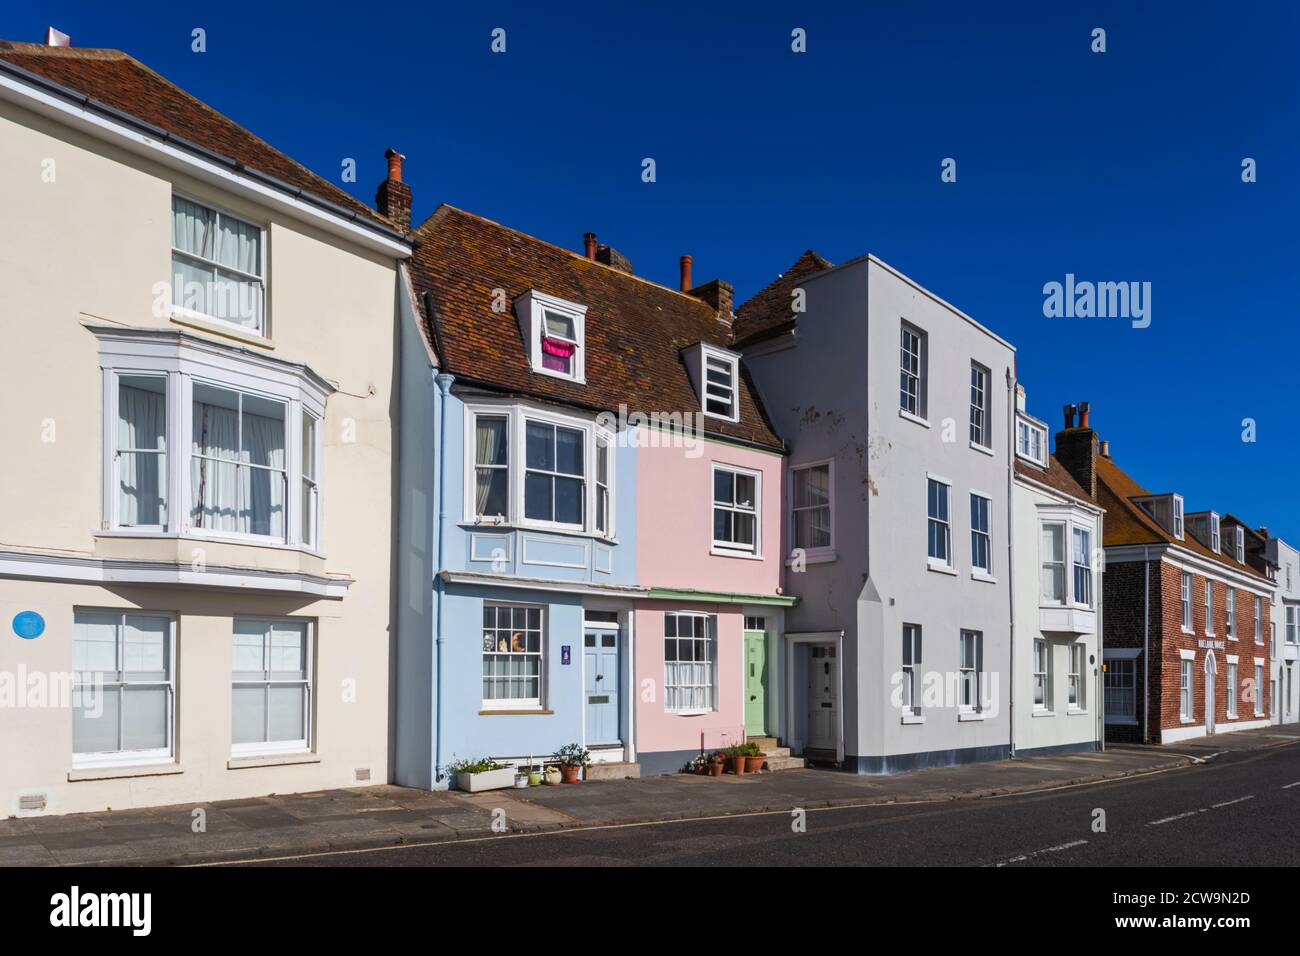 Inghilterra, Kent, Deal, Residential Street Scene con case colorate Foto Stock